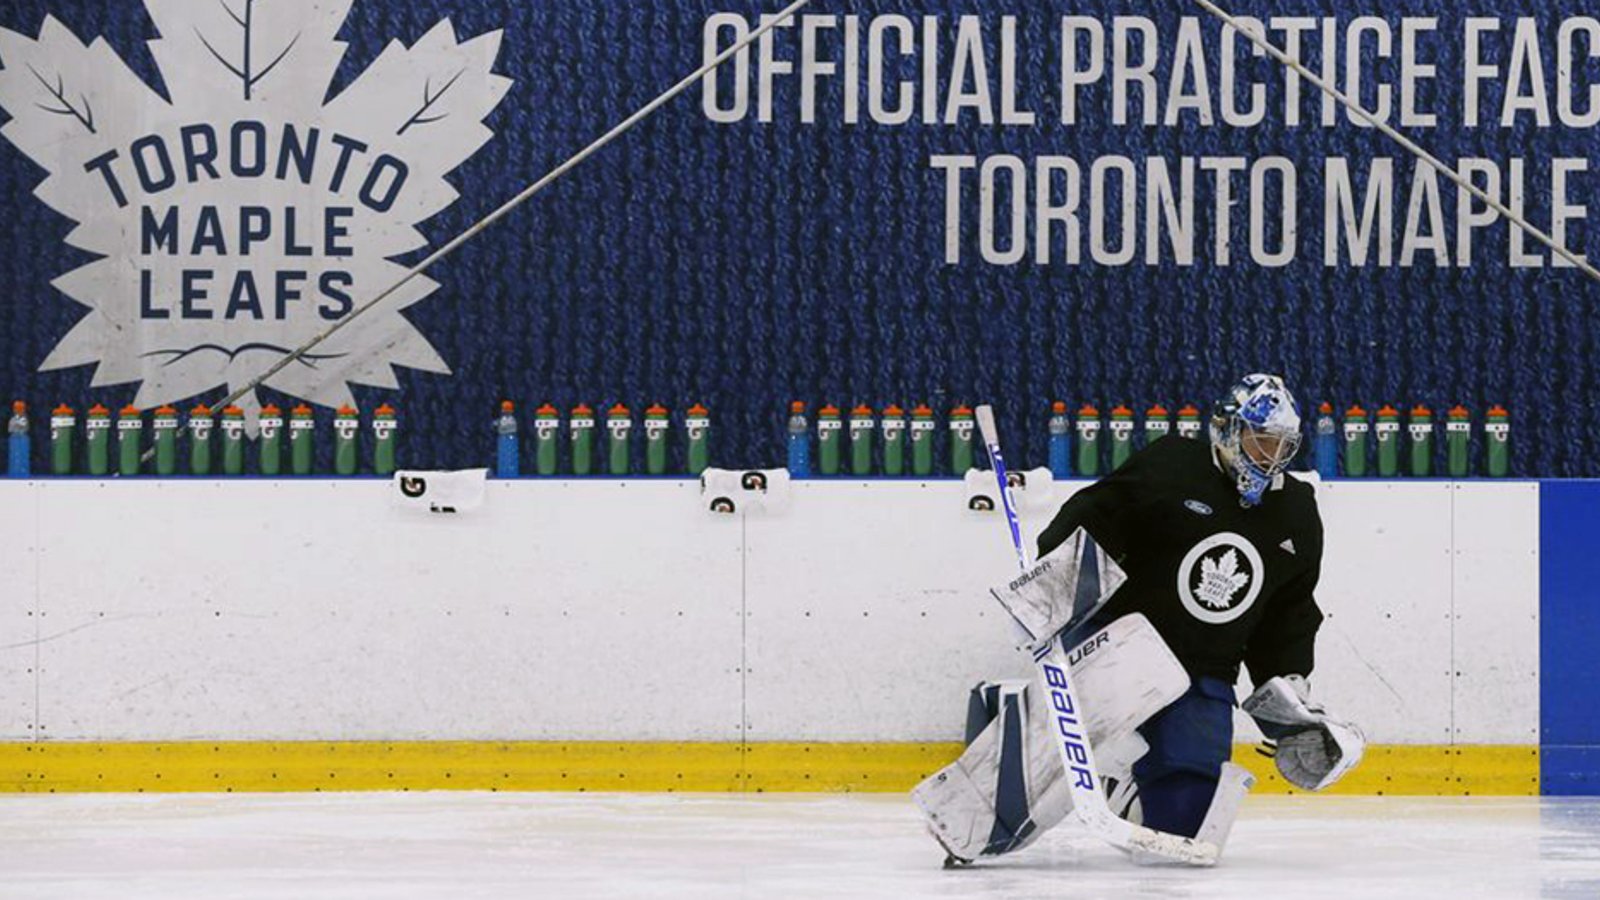 Major update on Andersen from Leafs practice this morning